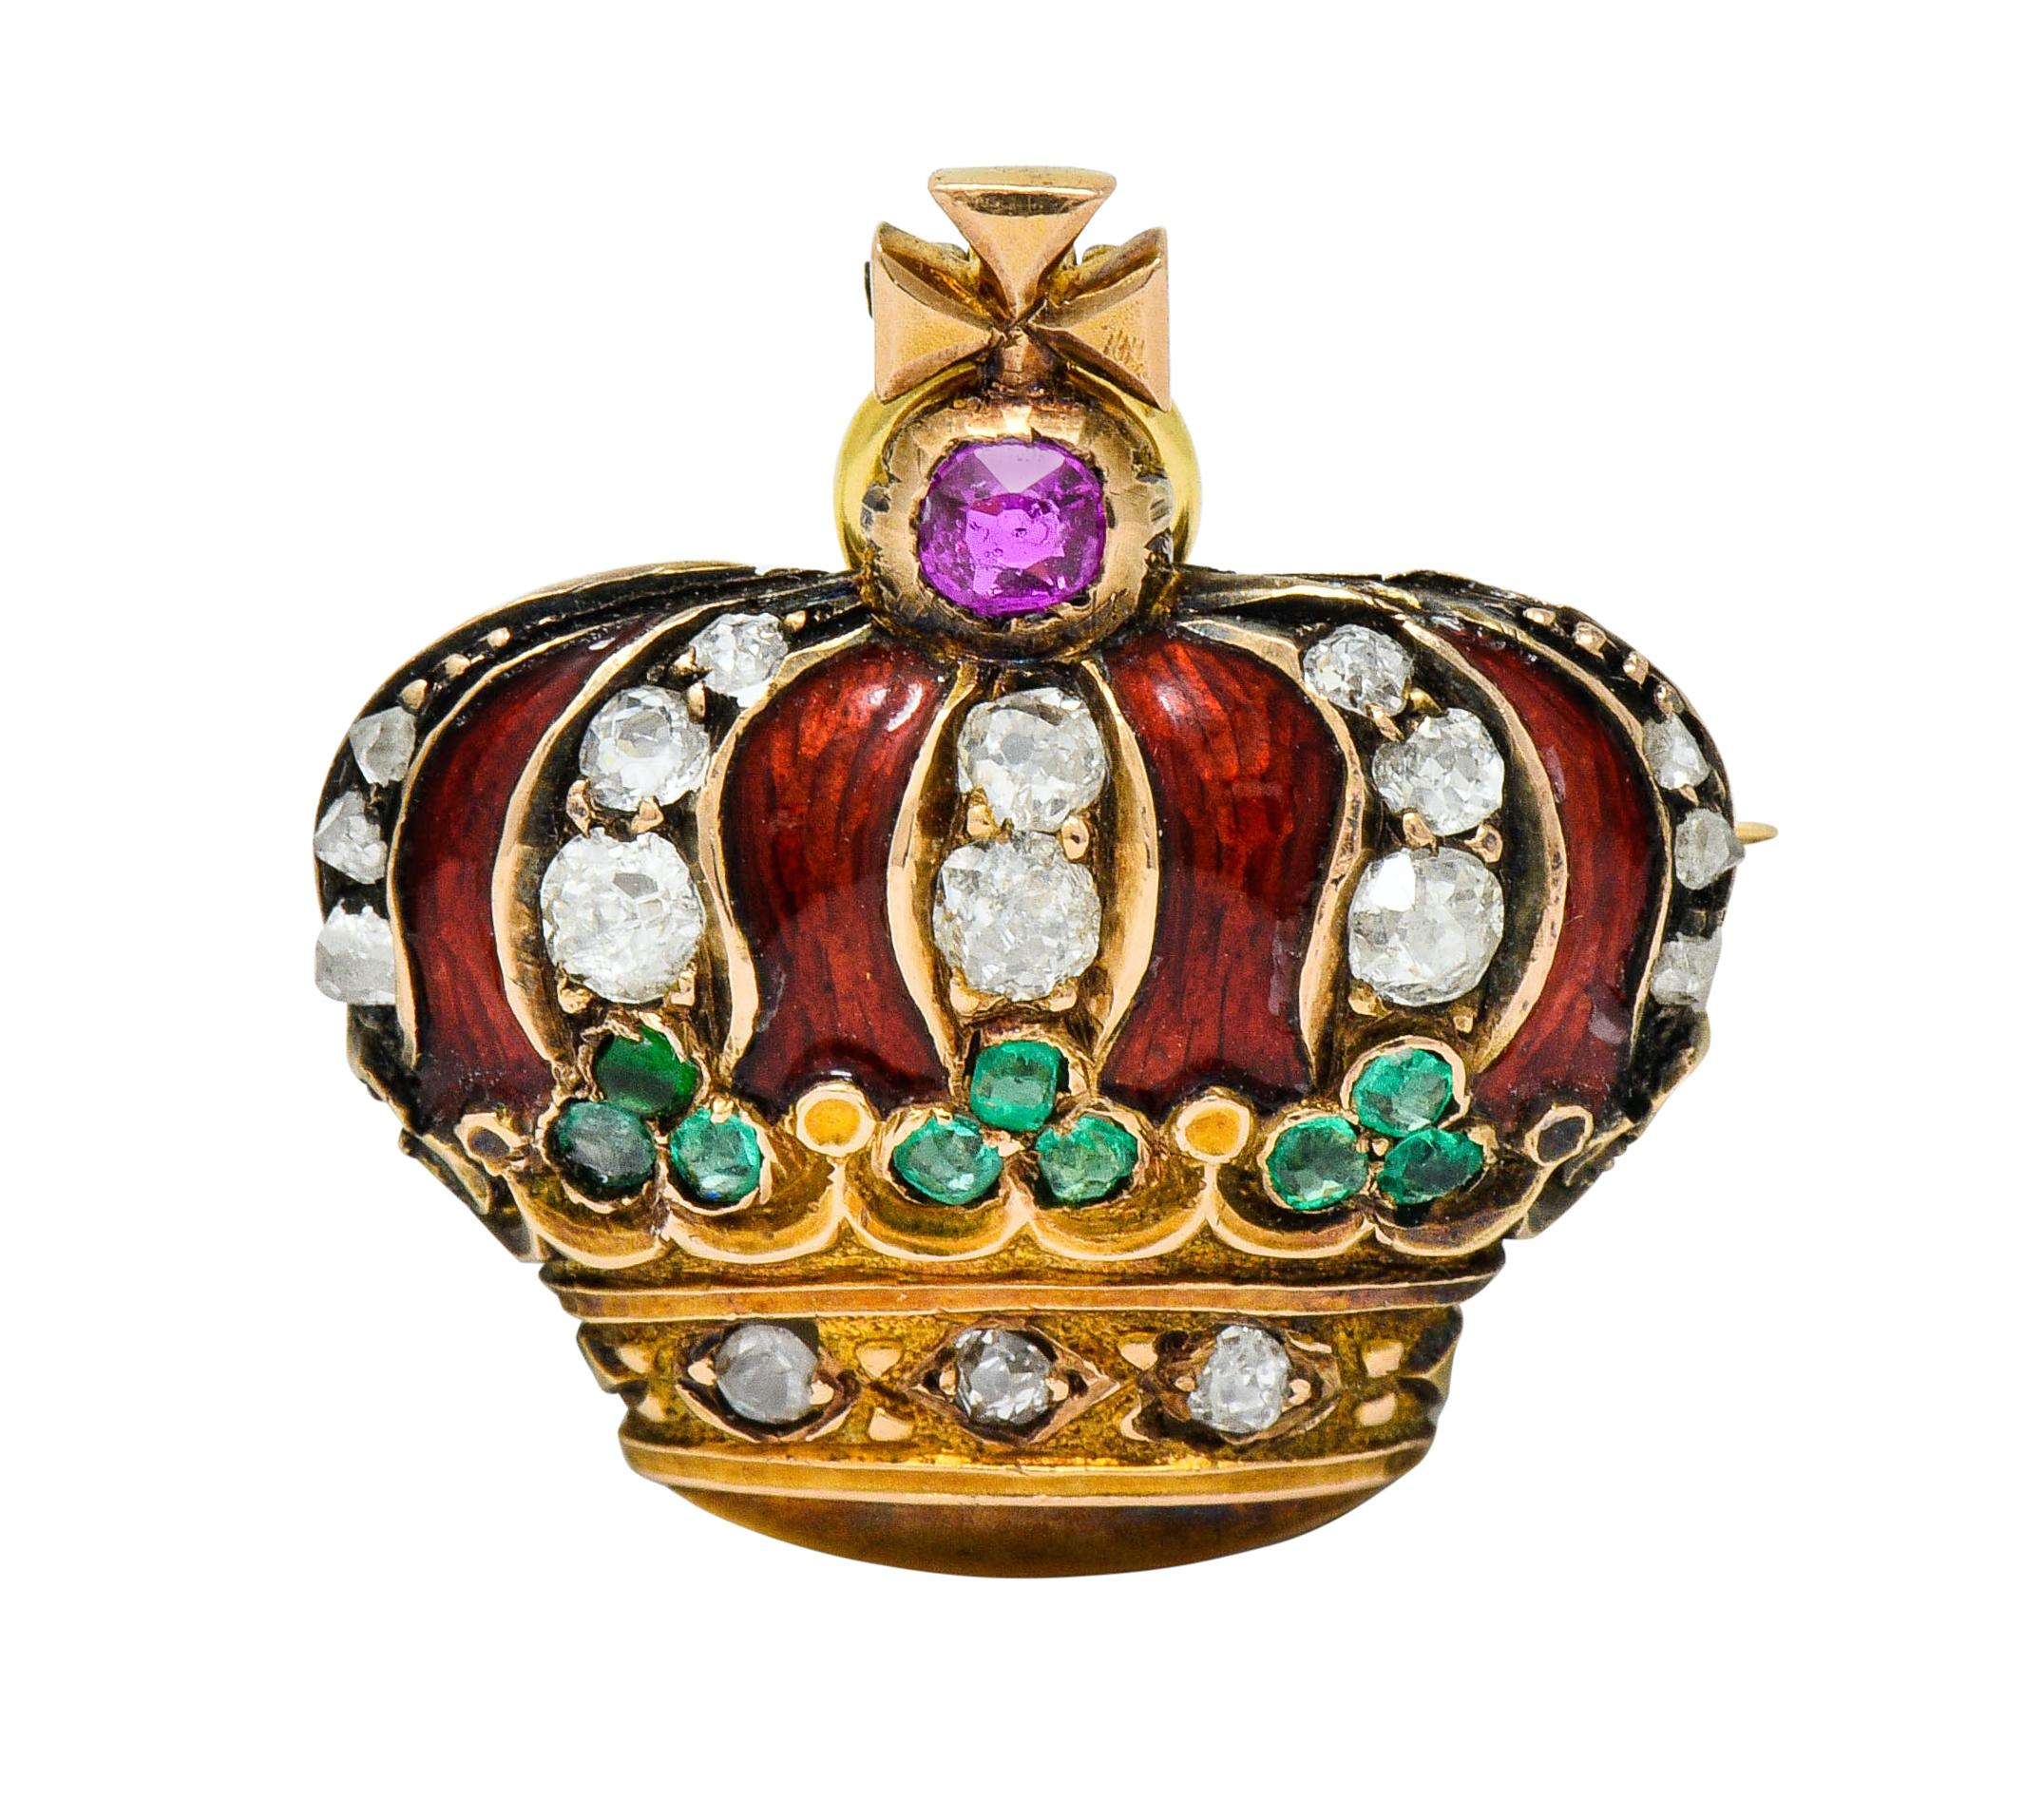 Designed as a cushioned imperial crown topped by a maltese cross accented by a cushion cut ruby weighing approximately 0.20 carat; bright pinkish-red

Cushioned area is glossed a bold brick red with enamel and exhibits no loss

With a trefoil motif